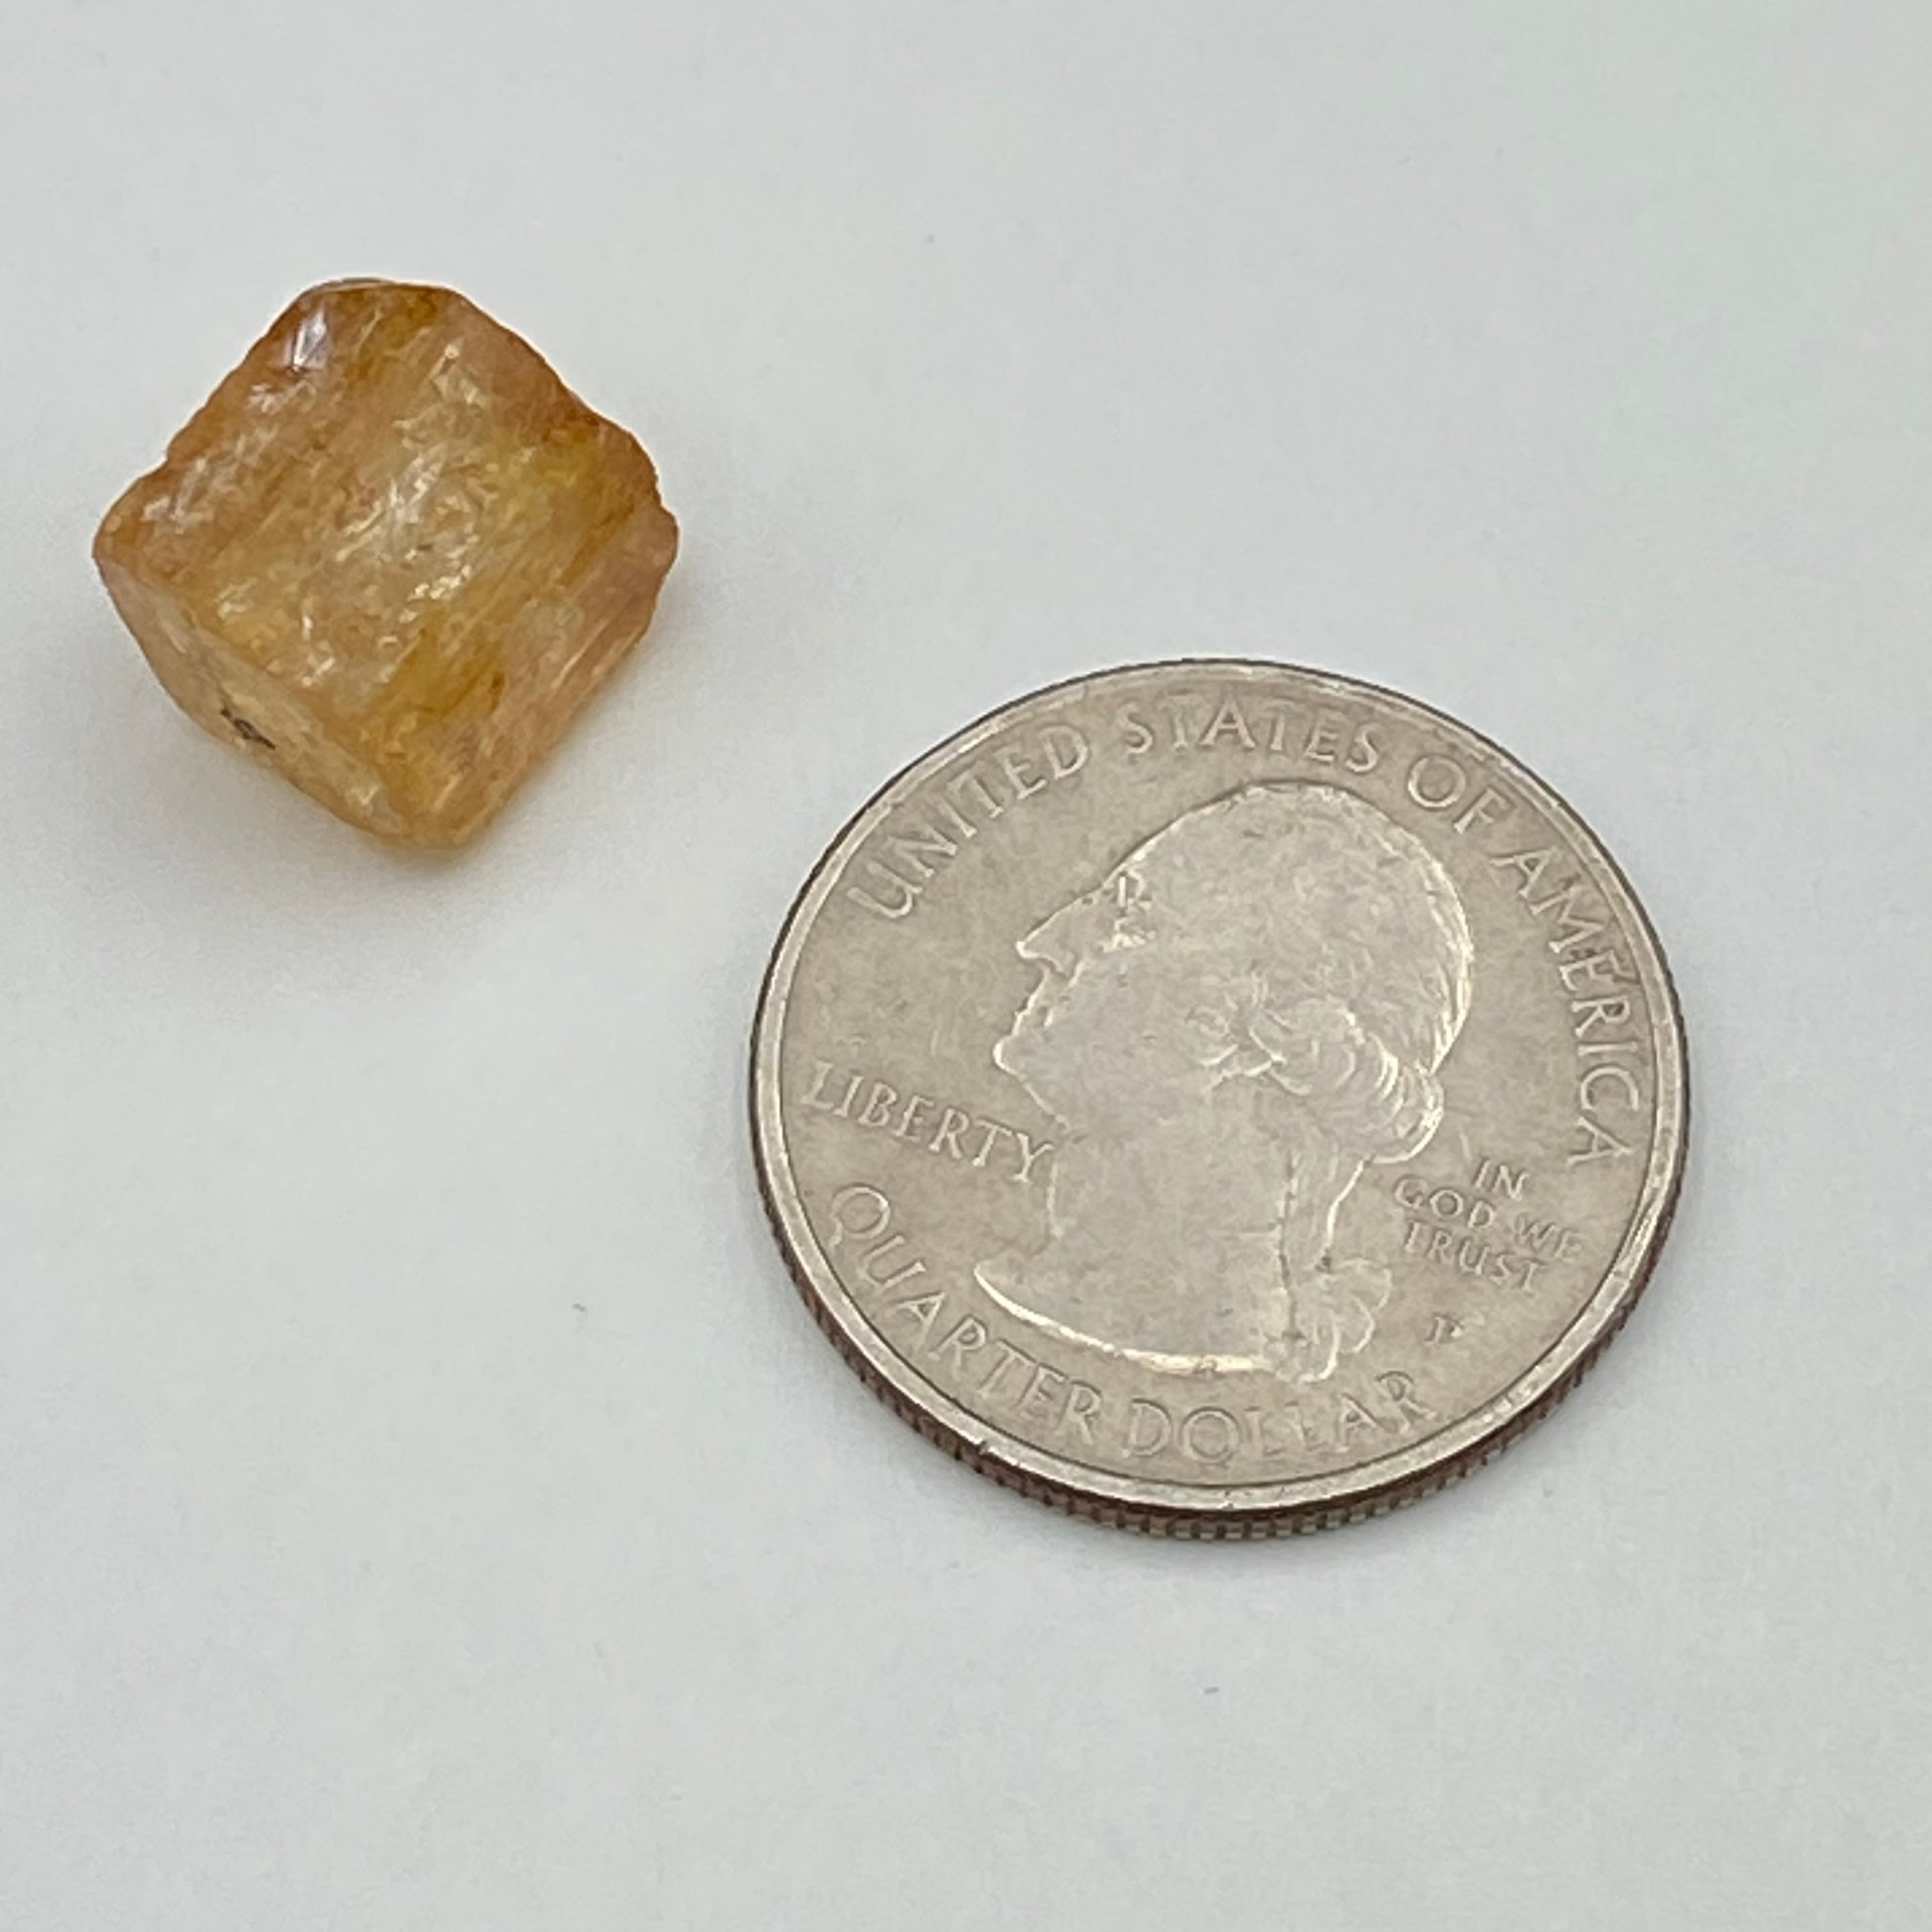 Imperial Topaz Natural Full Terminated Crystal - 174